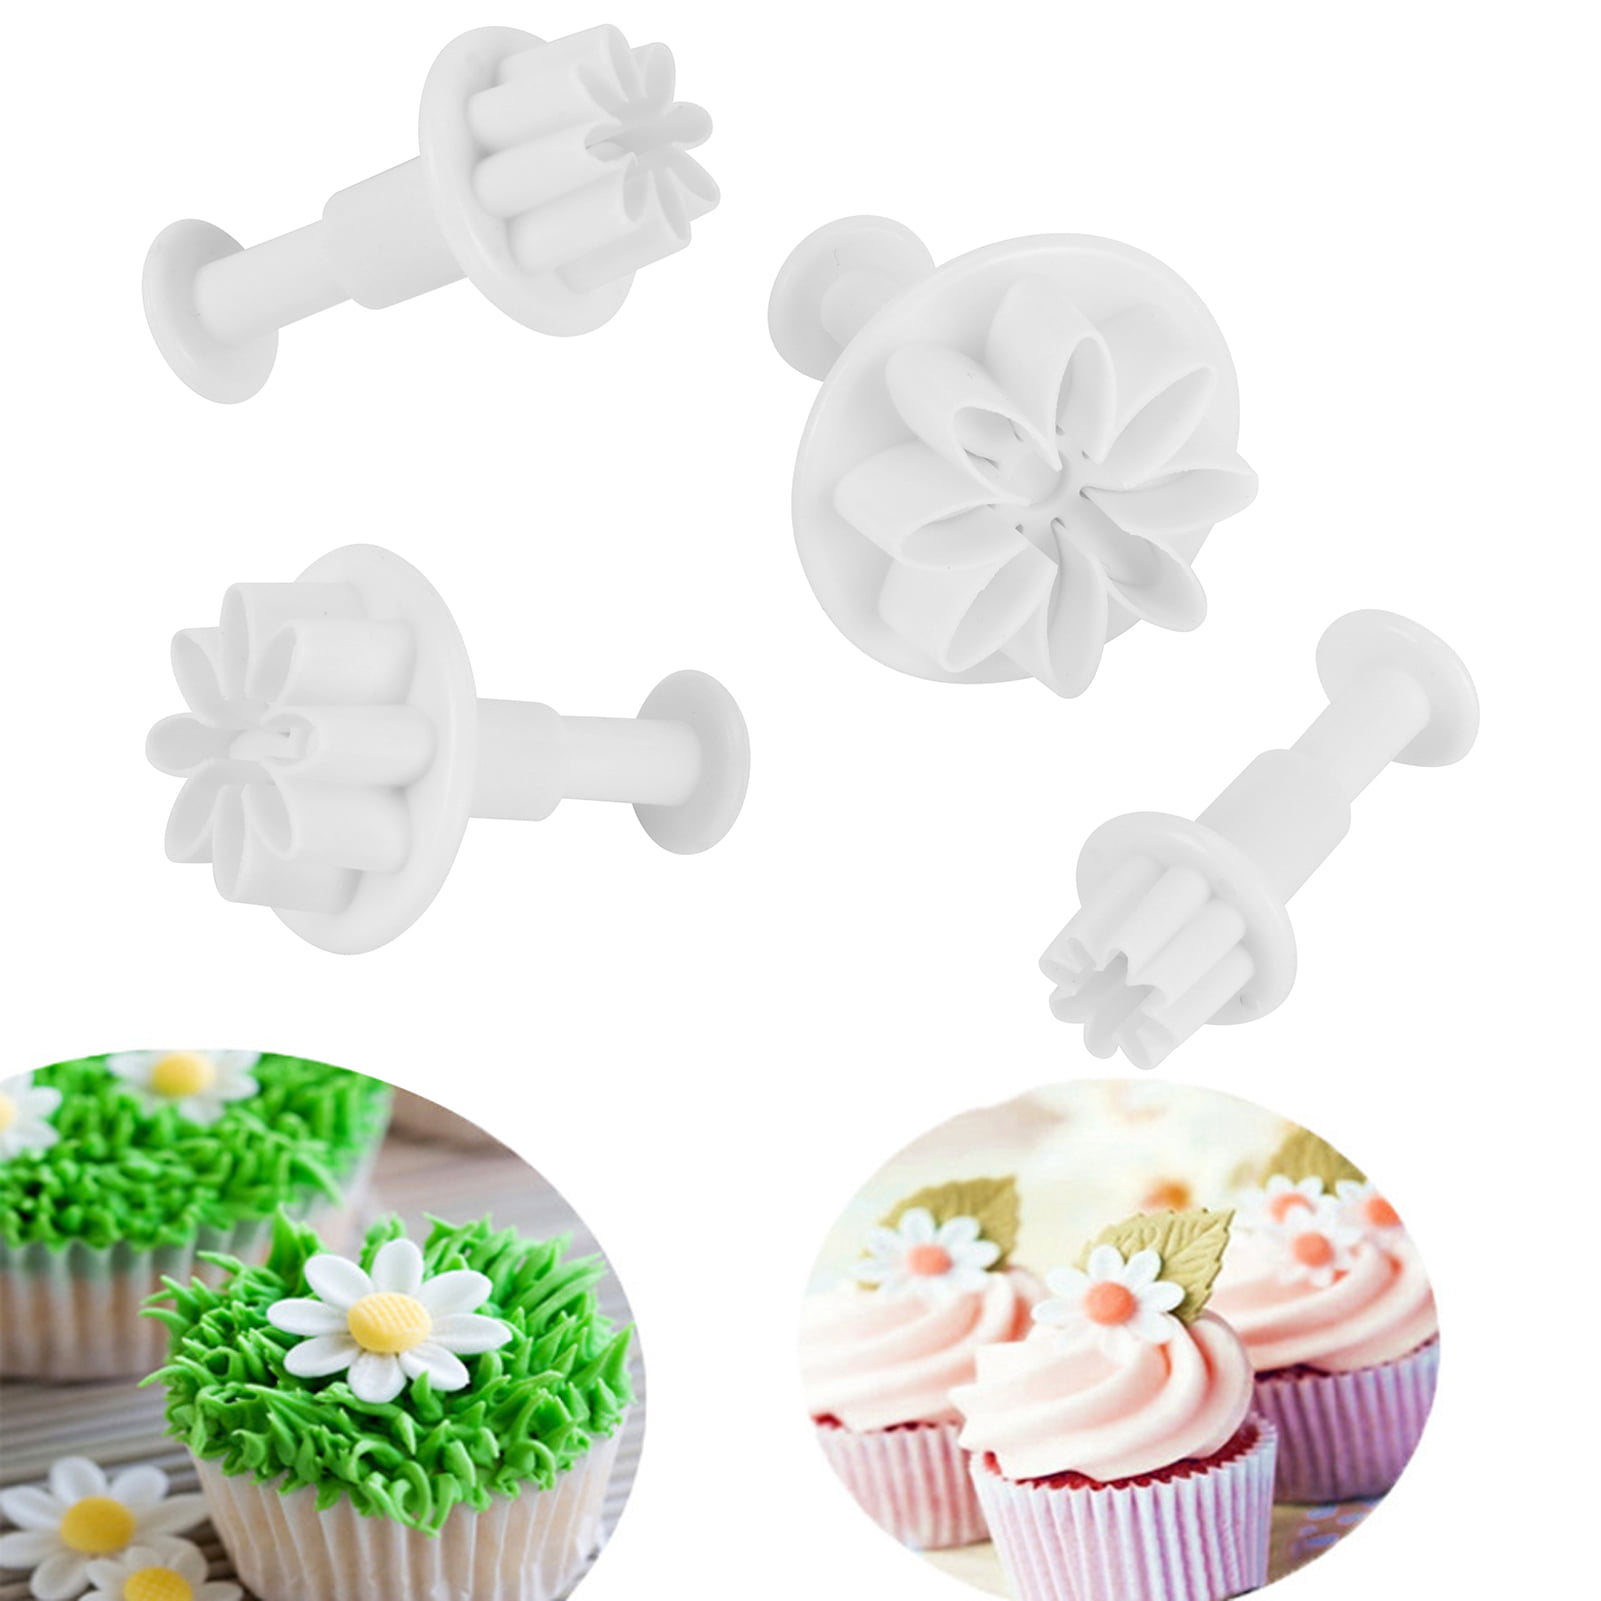 DIY Flower Birds Silicone Mould Chocolate Sugarcraft Fondant Mold Cake Decorating Mold Bakeware Baking Tools Durable and Practical 